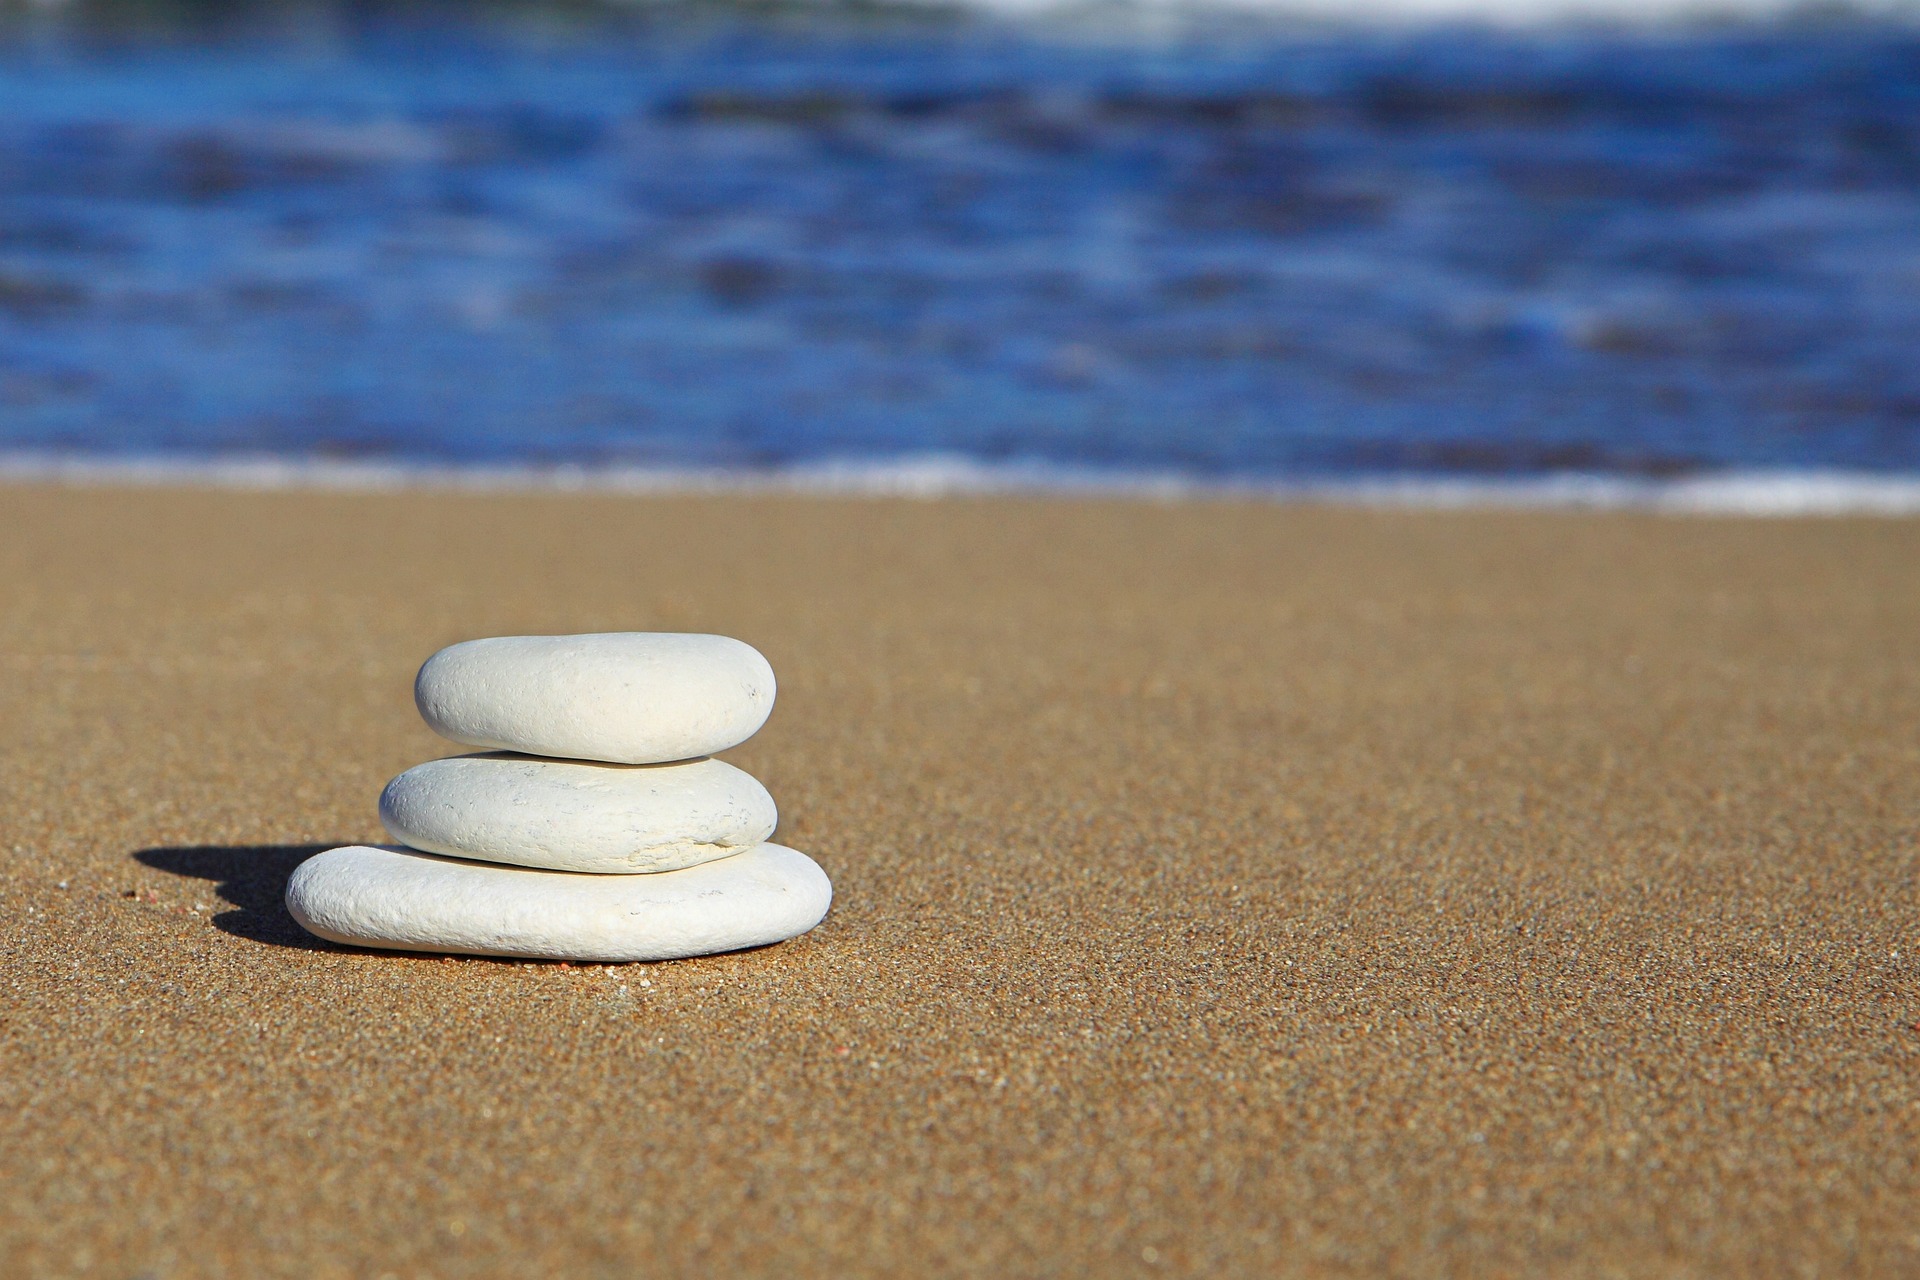 Work-life balance tips from our very own virtual team | Outsourcery